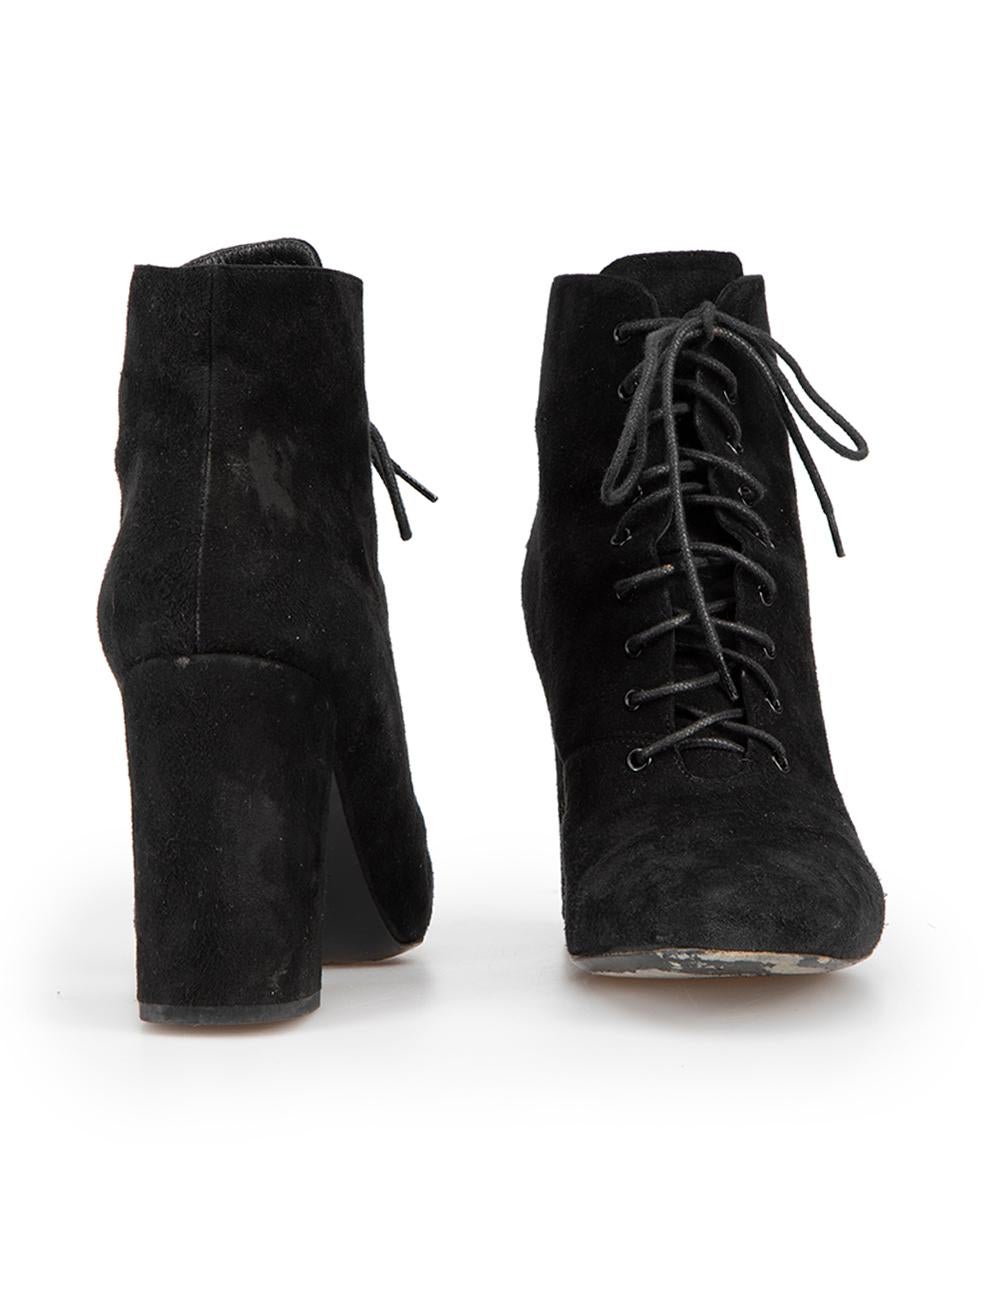 Saint Laurent Black Suede Lace-Up Boots Size IT 40 In Good Condition For Sale In London, GB